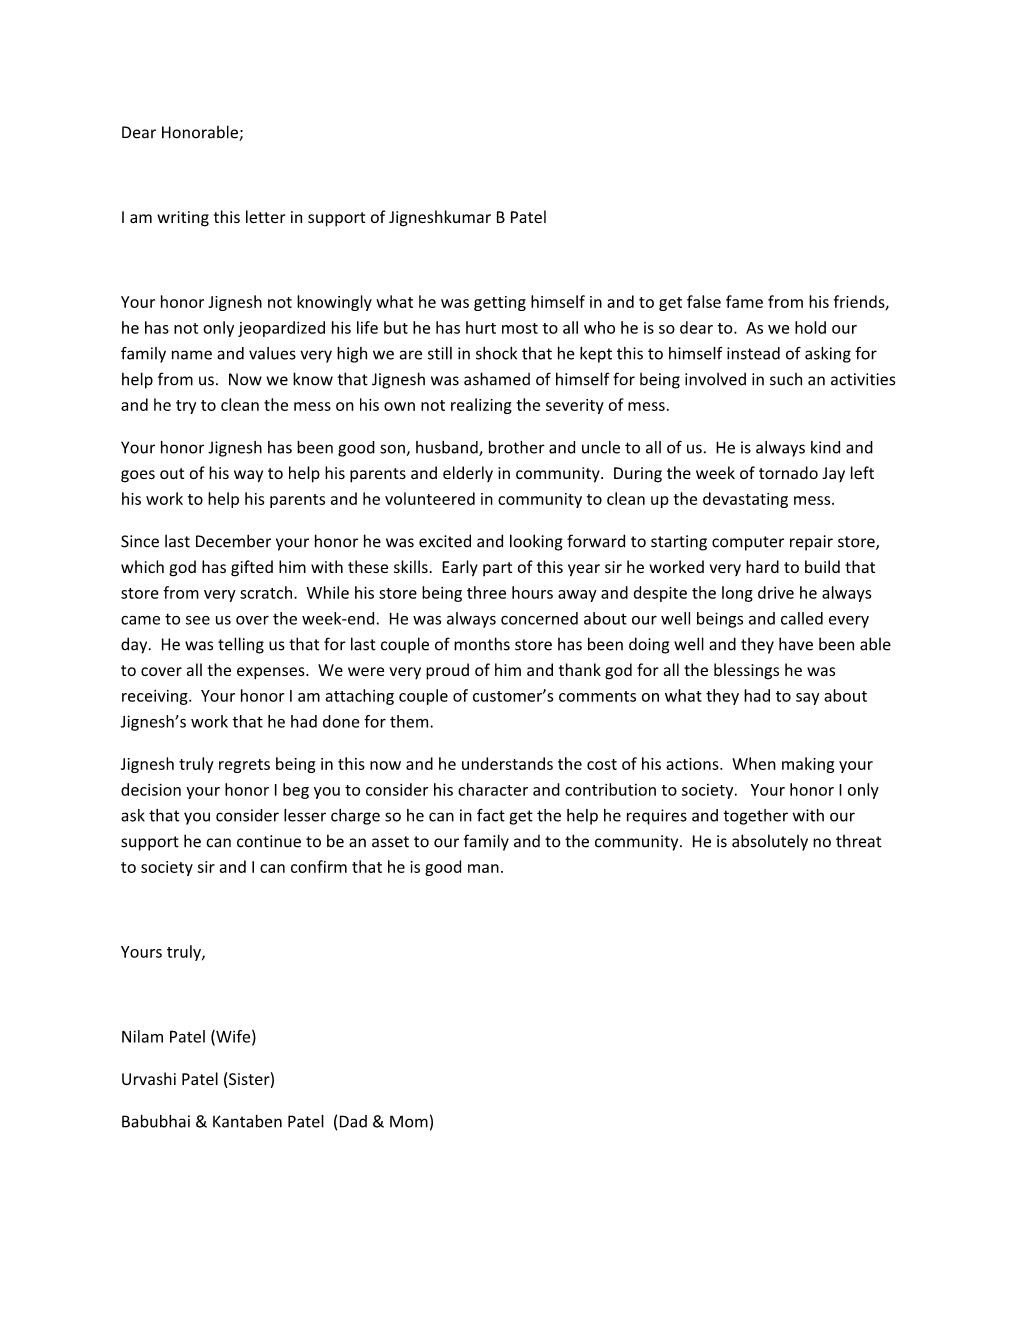 I Am Writing This Letter in Support of Jigneshkumar B Patel